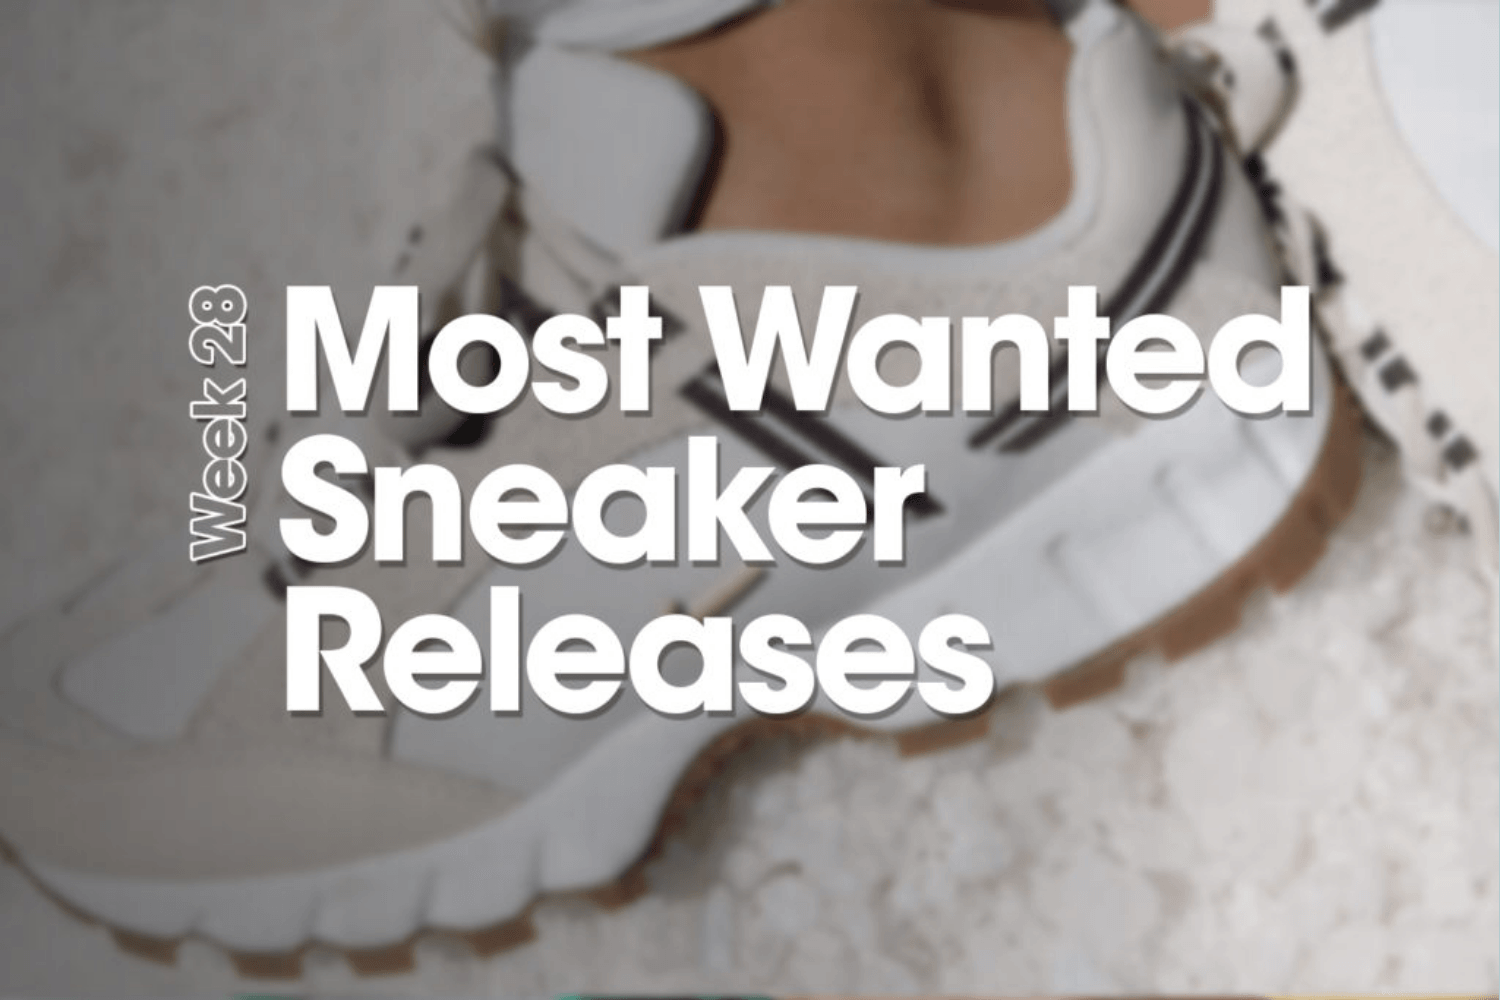 Most Wanted Sneaker Releases - Woche 28